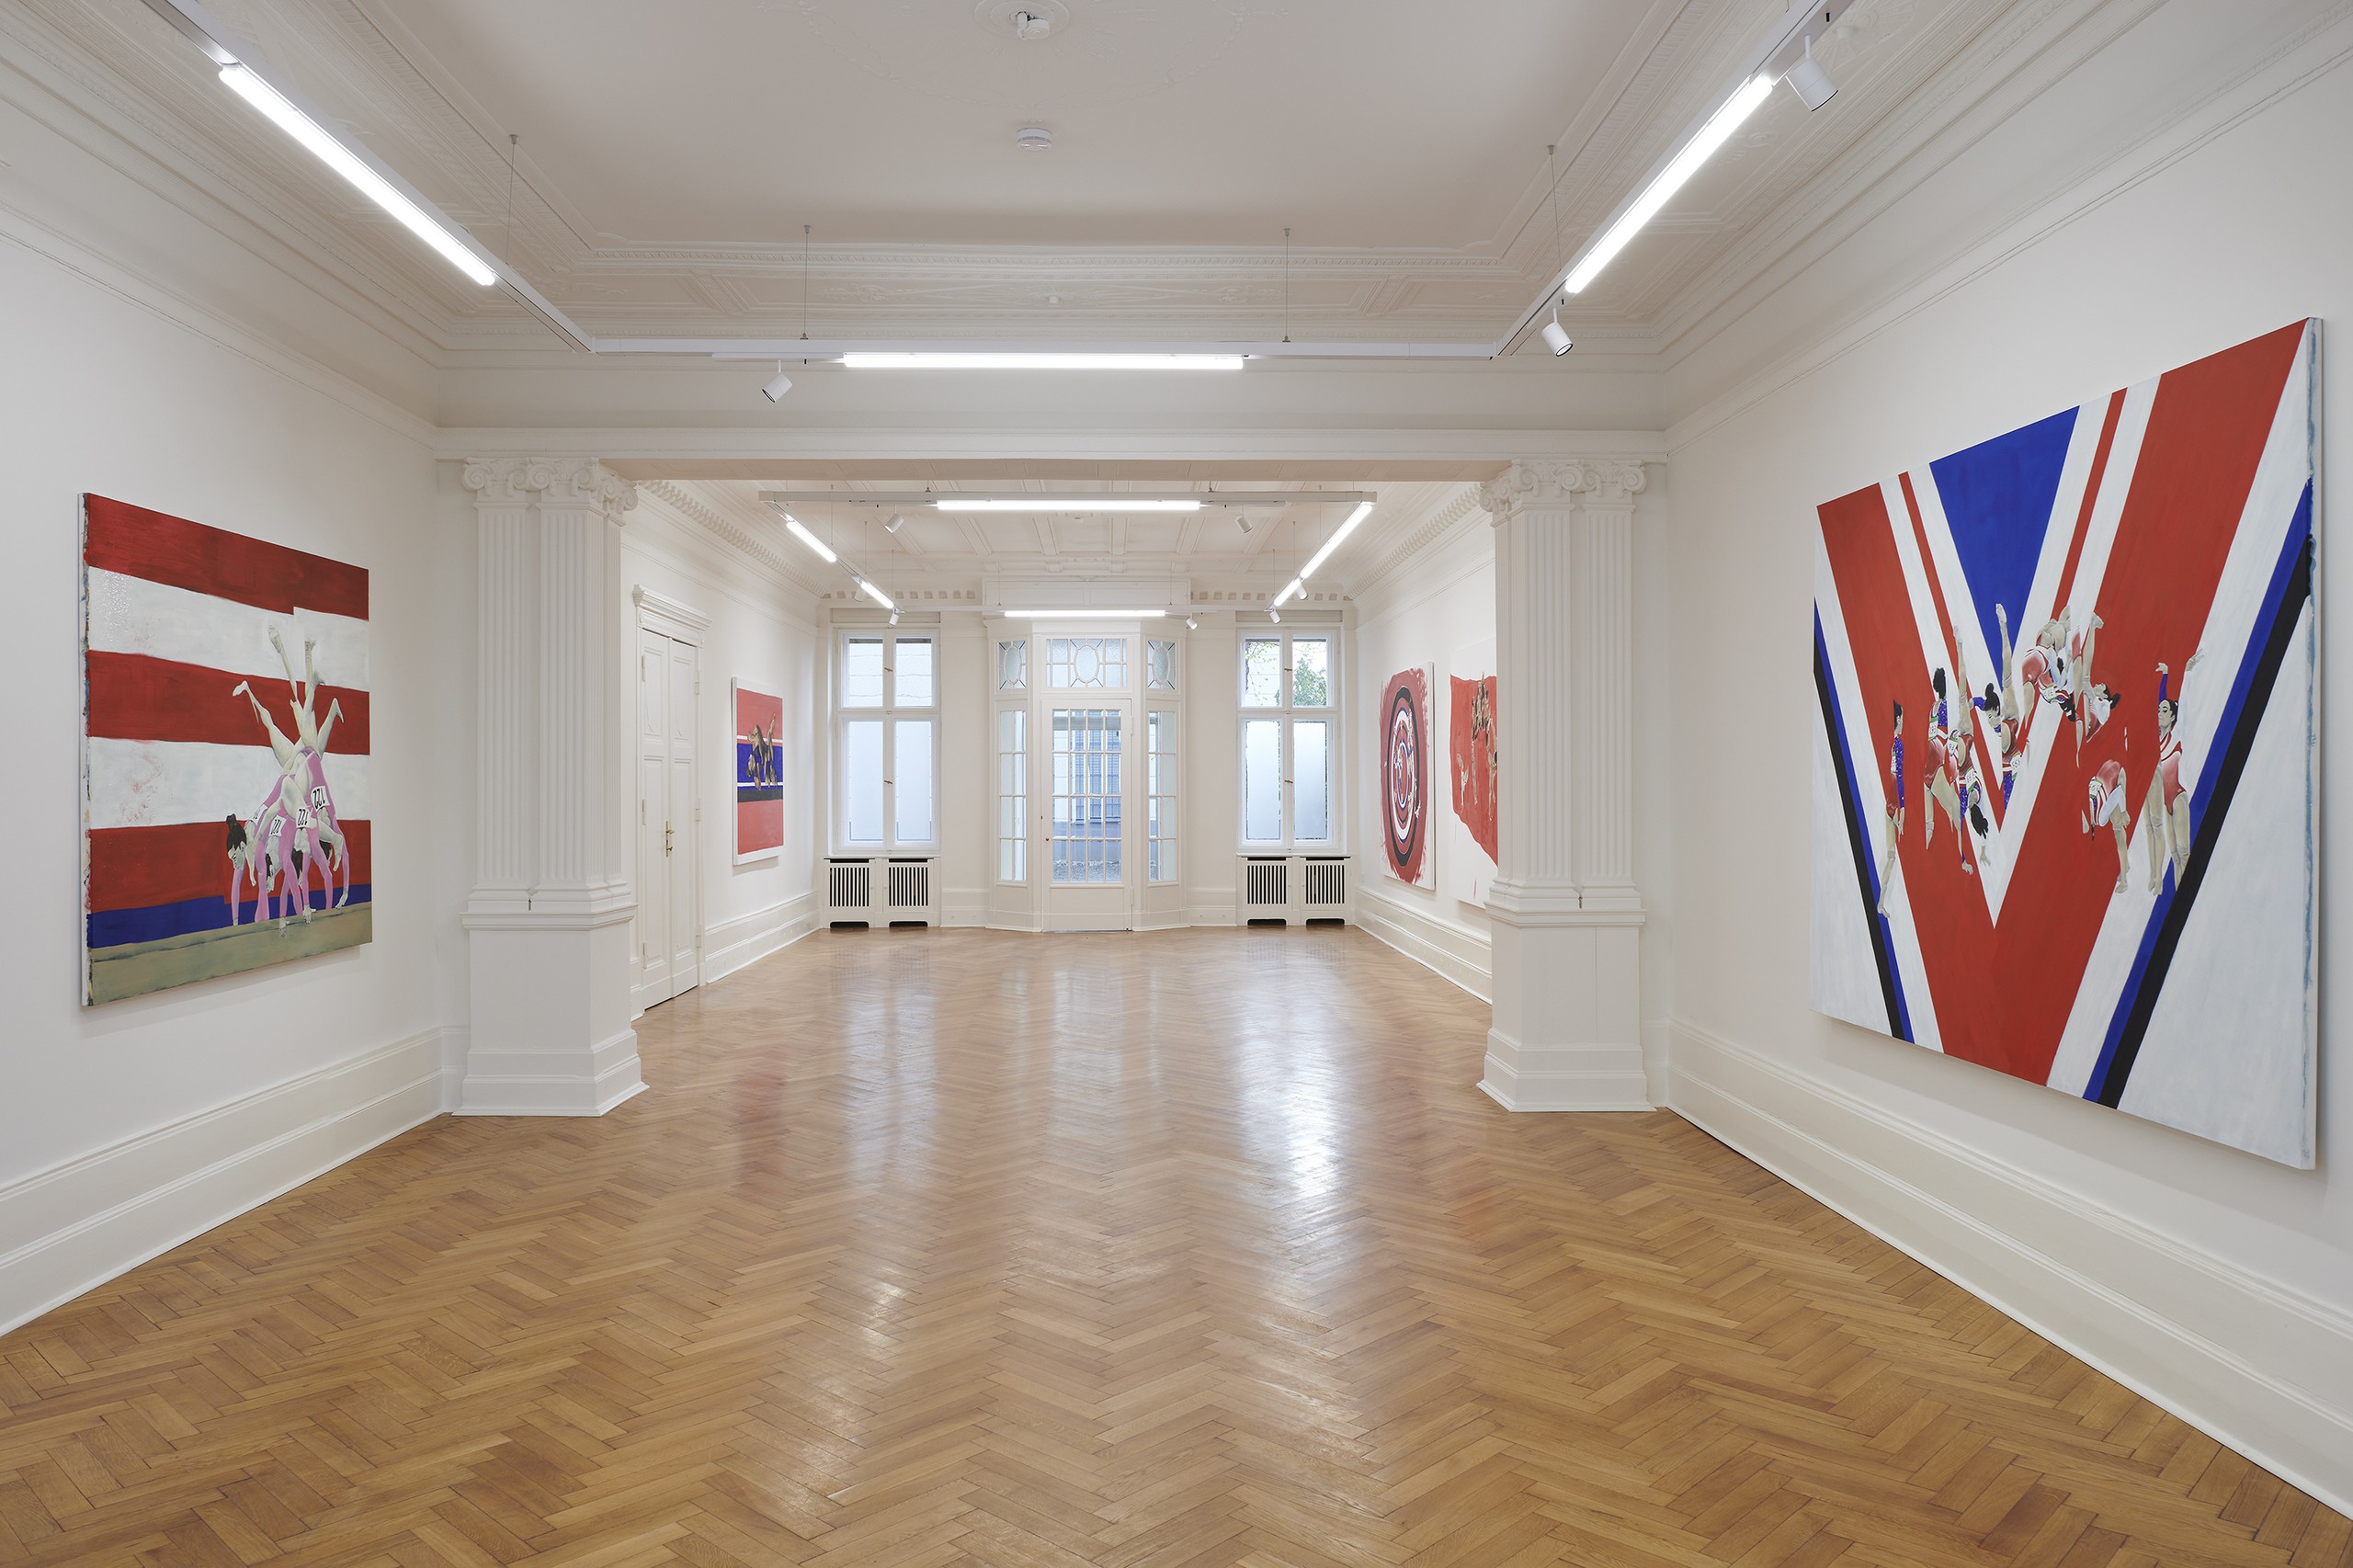 Installation view, Wash Us With Fire, Société, Berlin, 2021